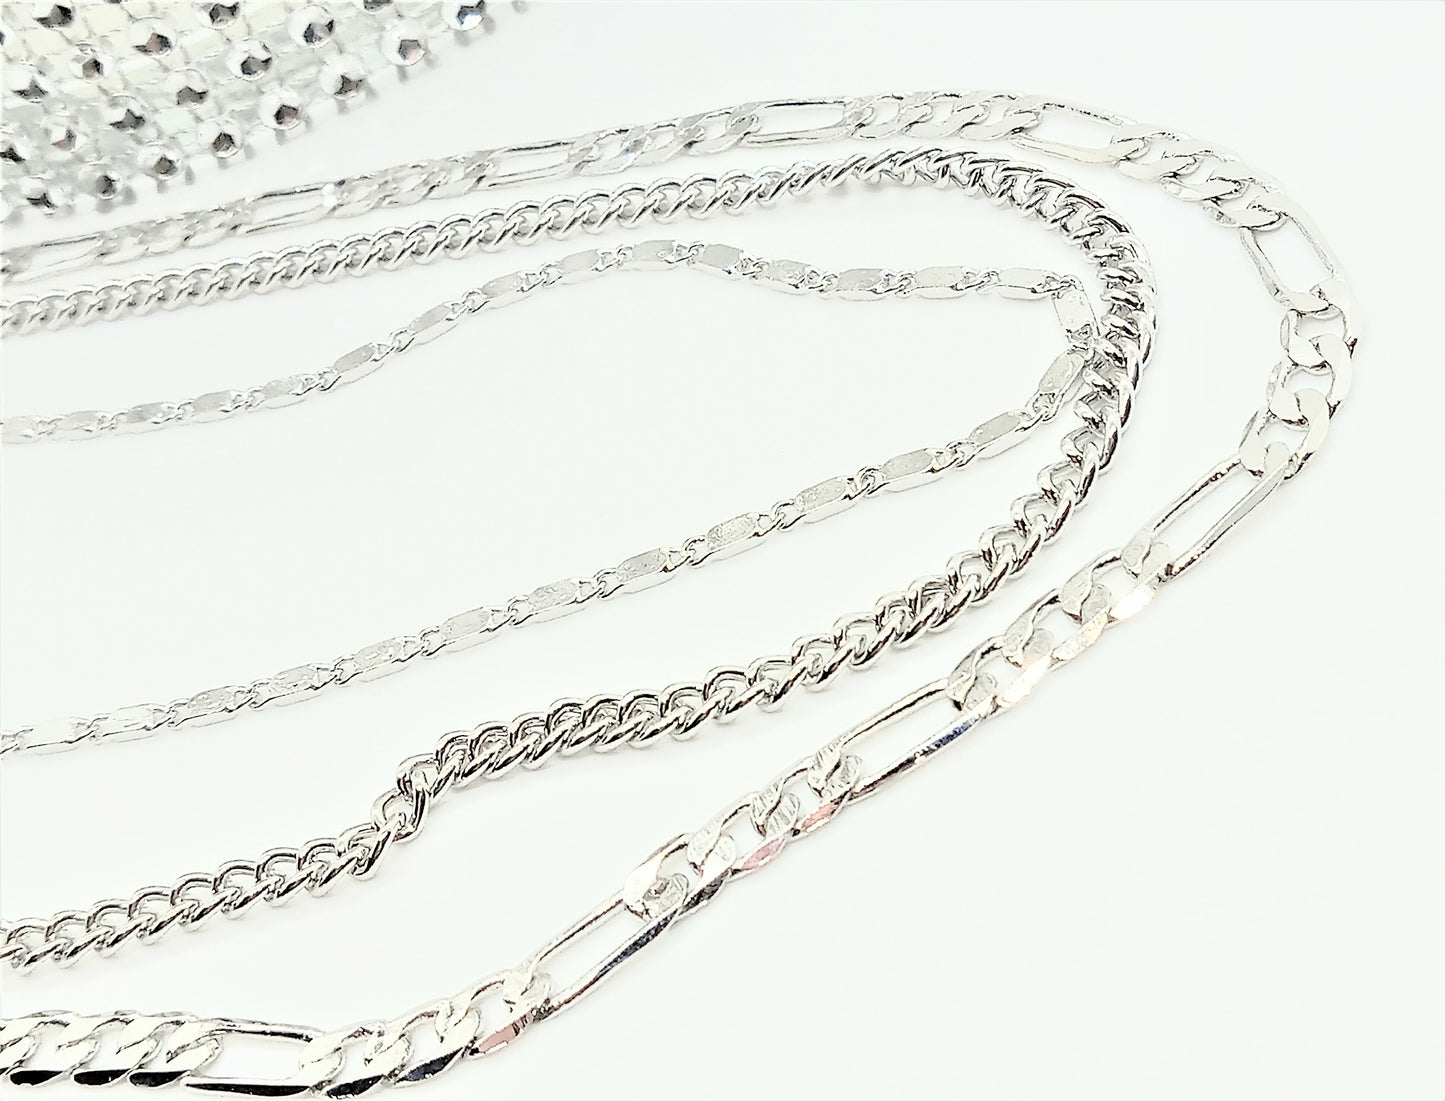 Flattering Triple Chain Necklace